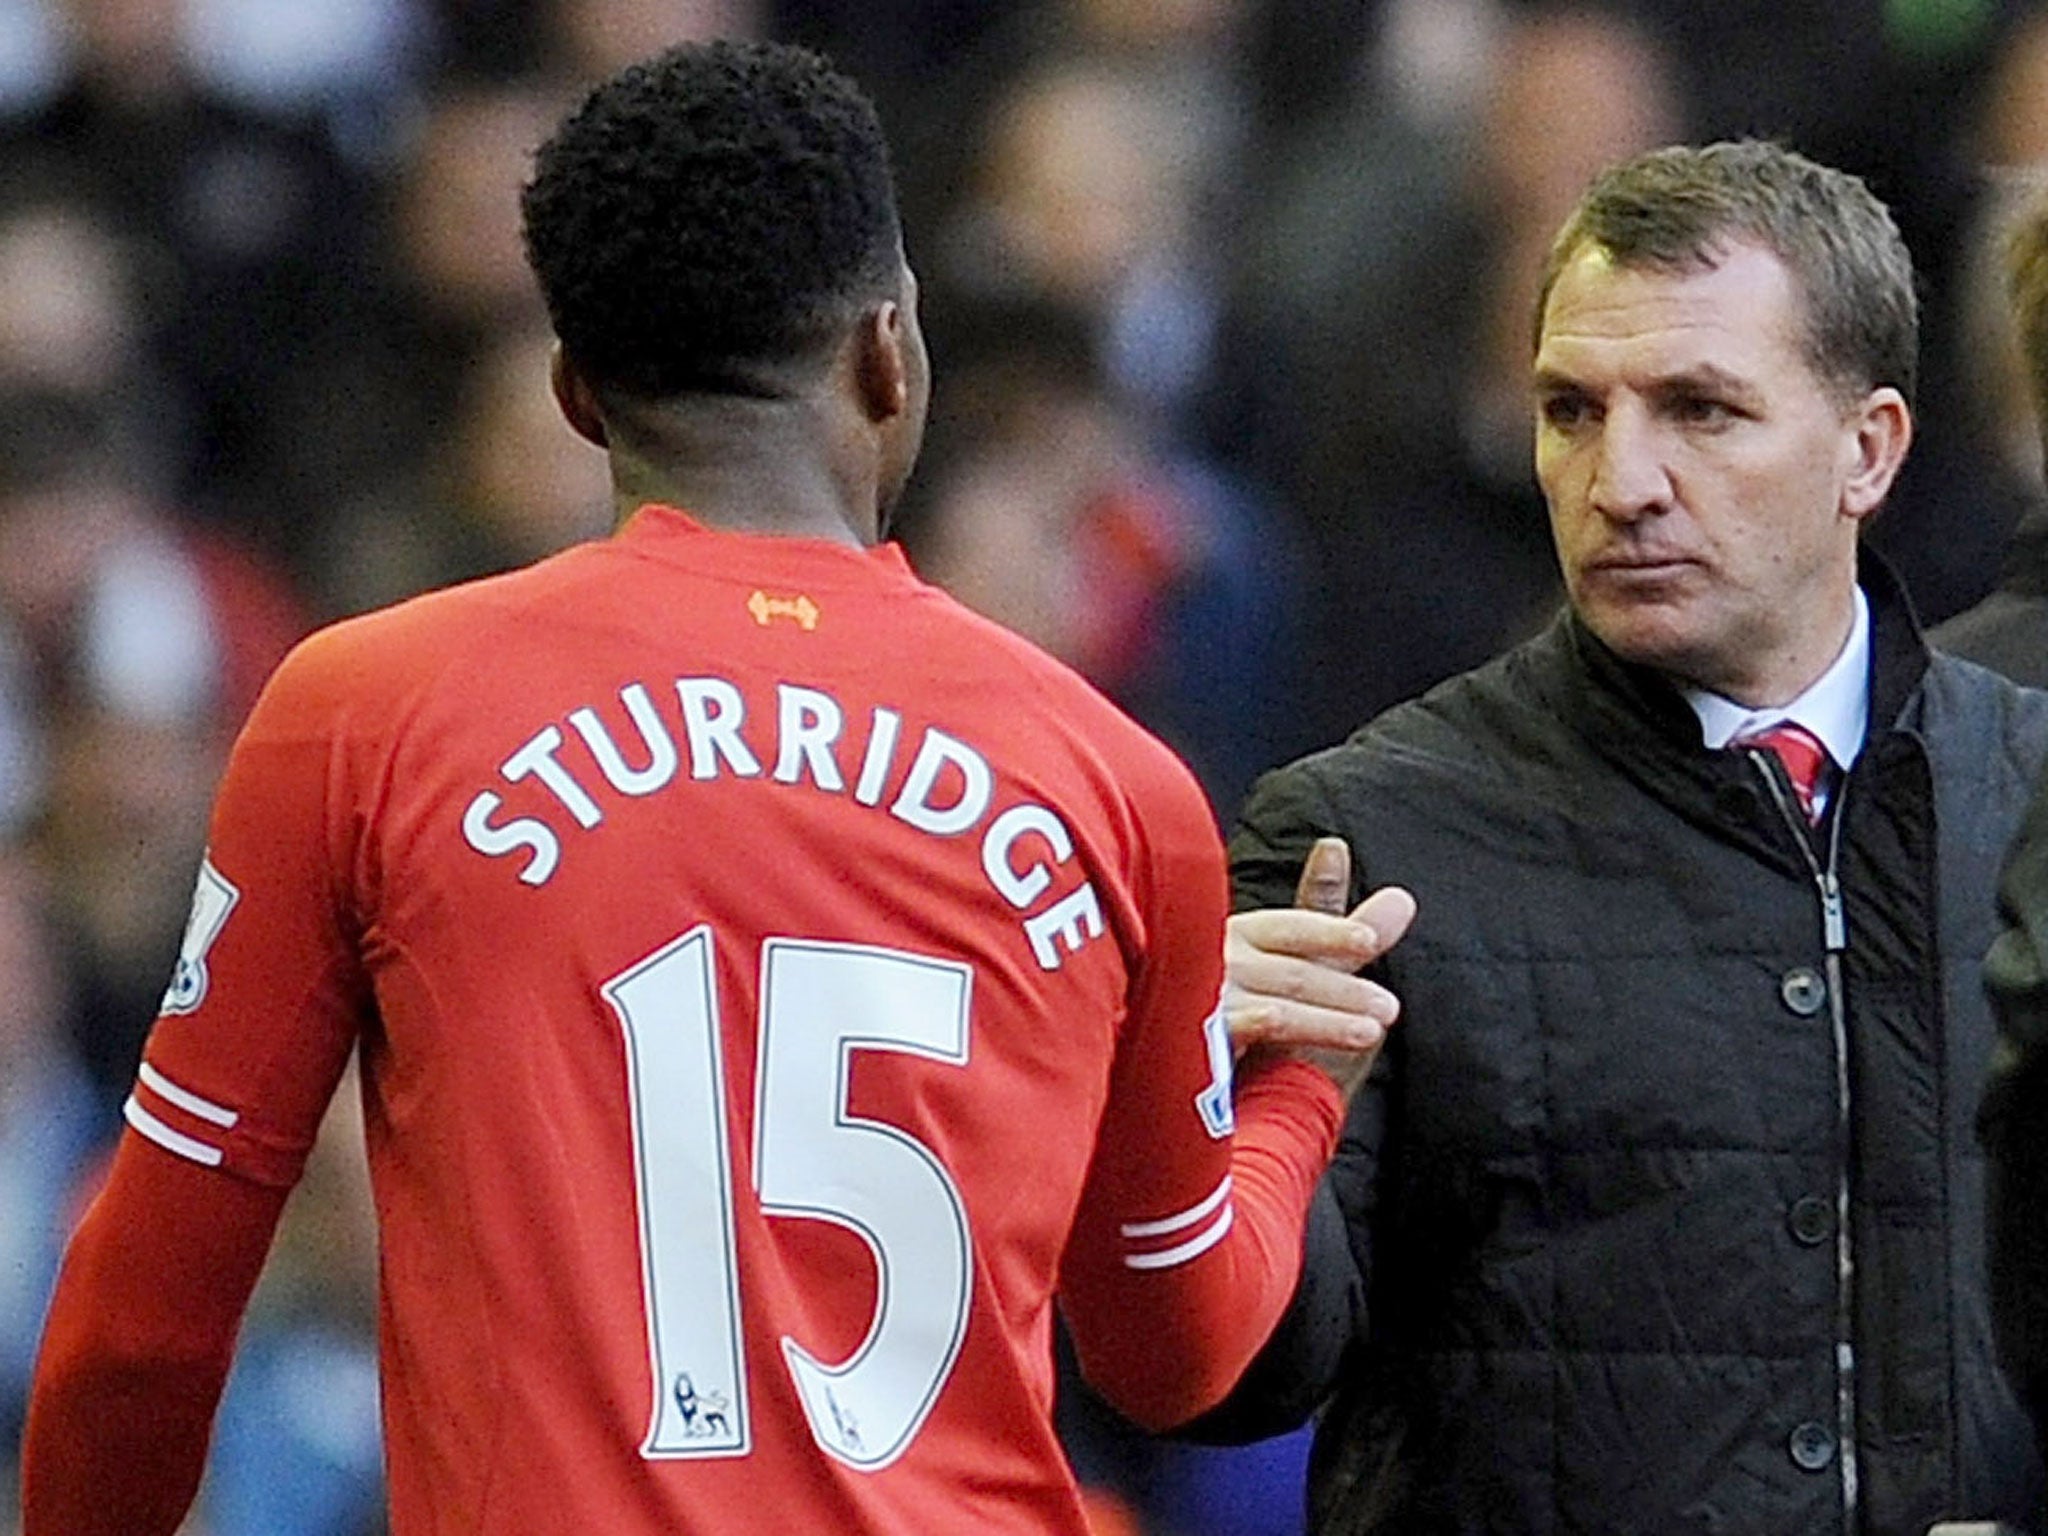 Liverpool manager Brendan Rodgers shakes the hand of striker Daniel Sturridge as he leaves the pitch